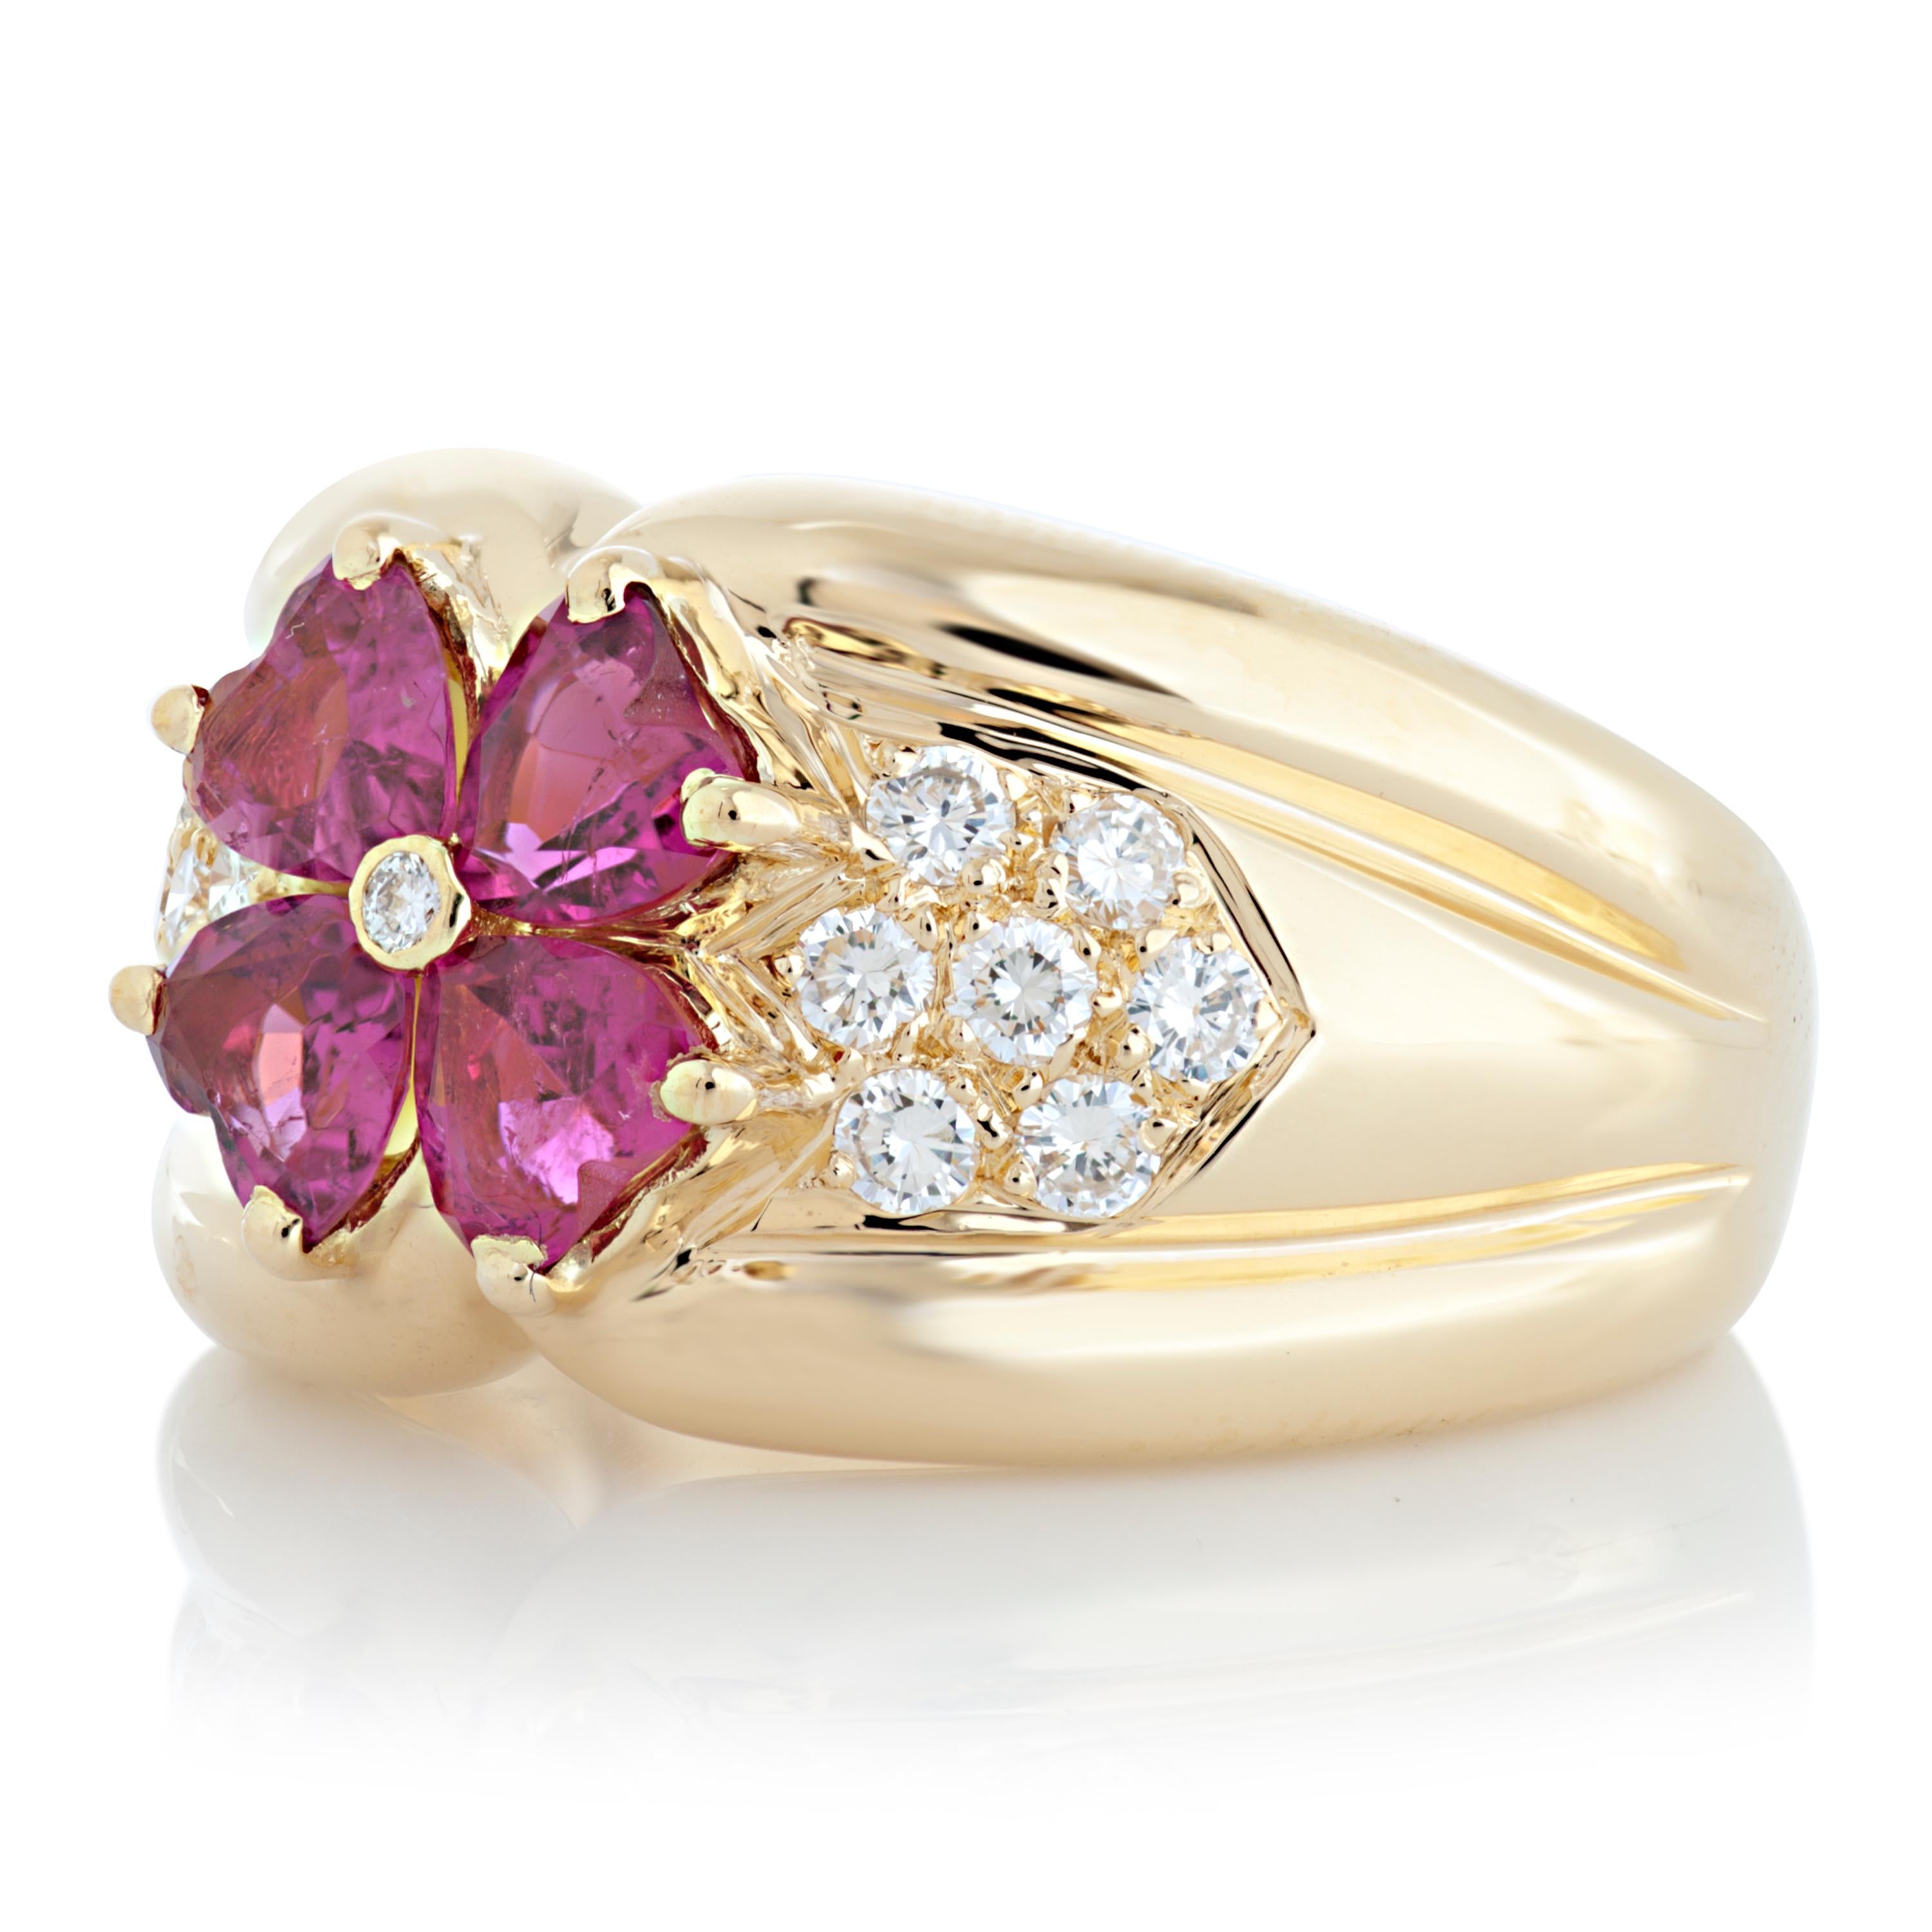 Van Cleef & Arpels diamond and pink tourmaline ring in 18k yellow gold.

This VCA ring features 4 heart shaped pink tourmalines set in a flower design totaling approximately 1.06 carat, as well as 0.35 carat of round brilliant cut diamonds with E-F